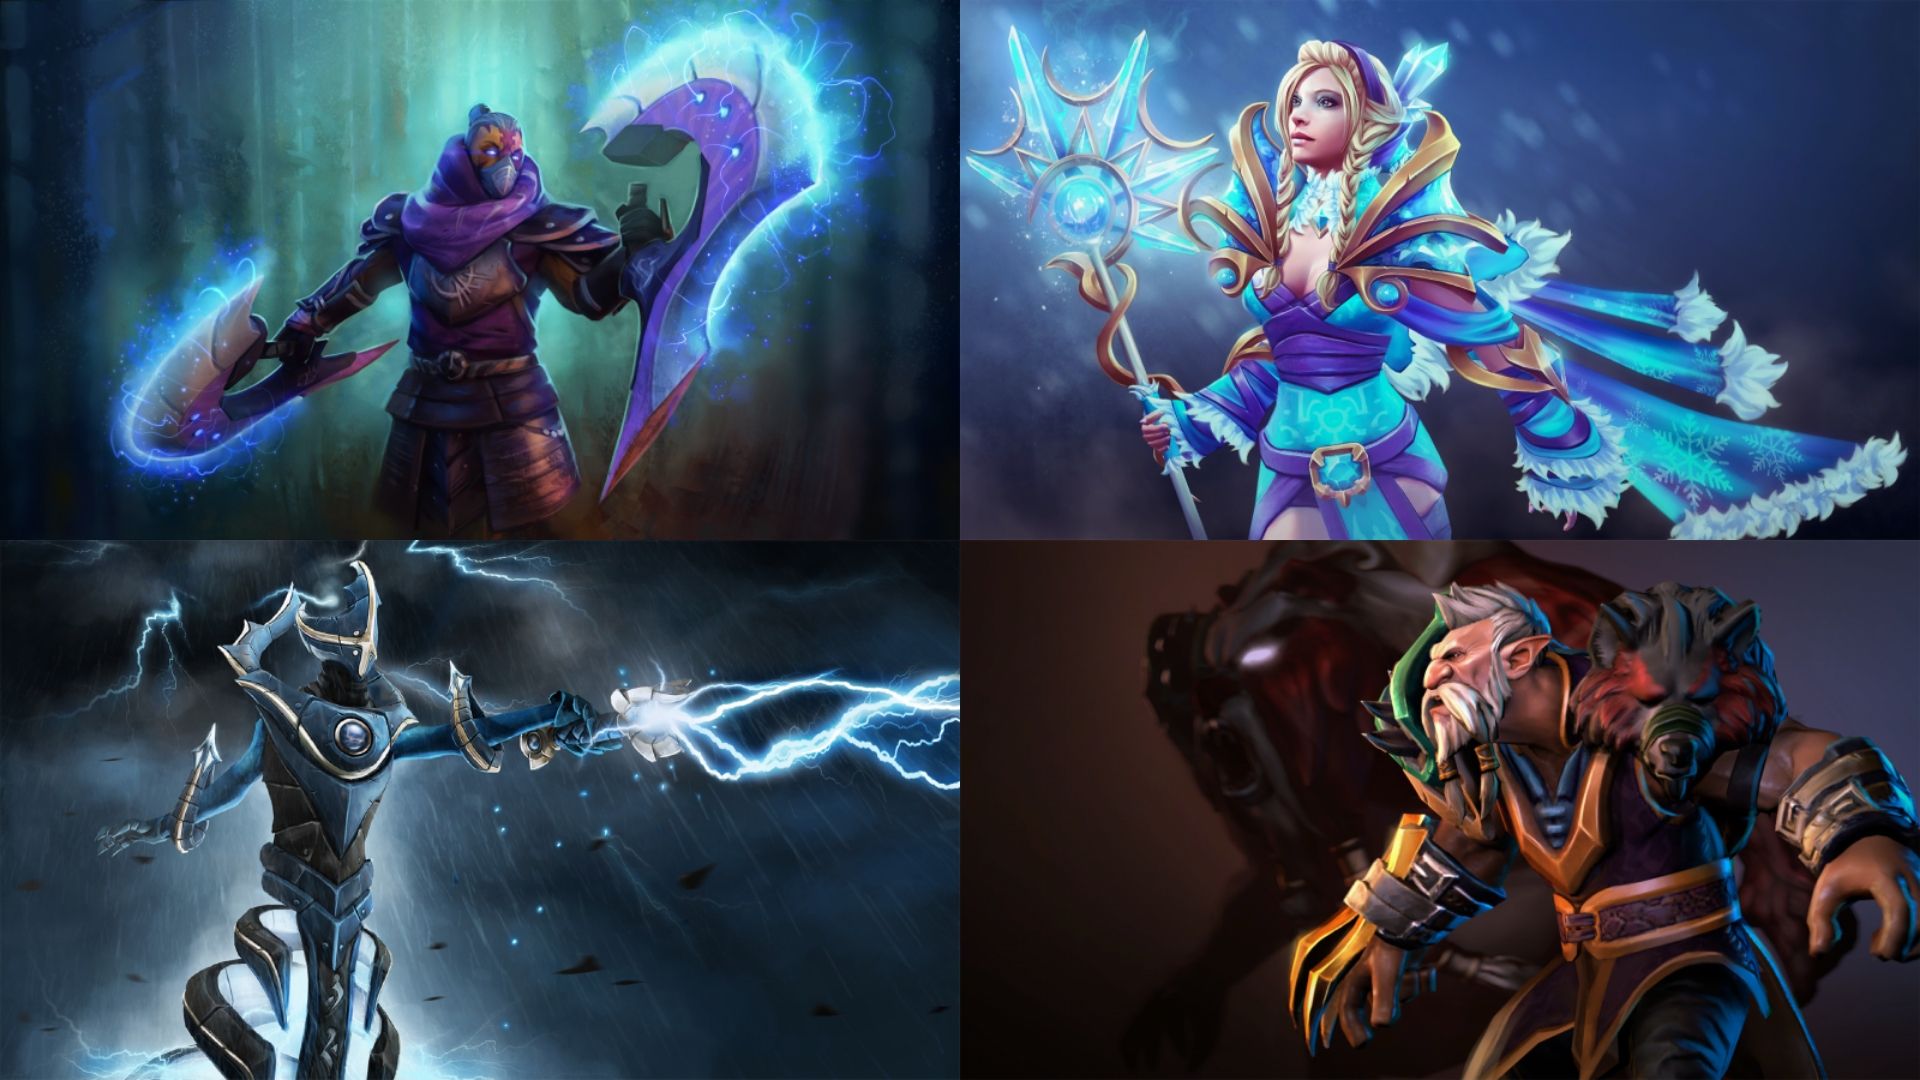 Lone Druid Razor Anti Mage And Crystal Maiden Are The Biggest